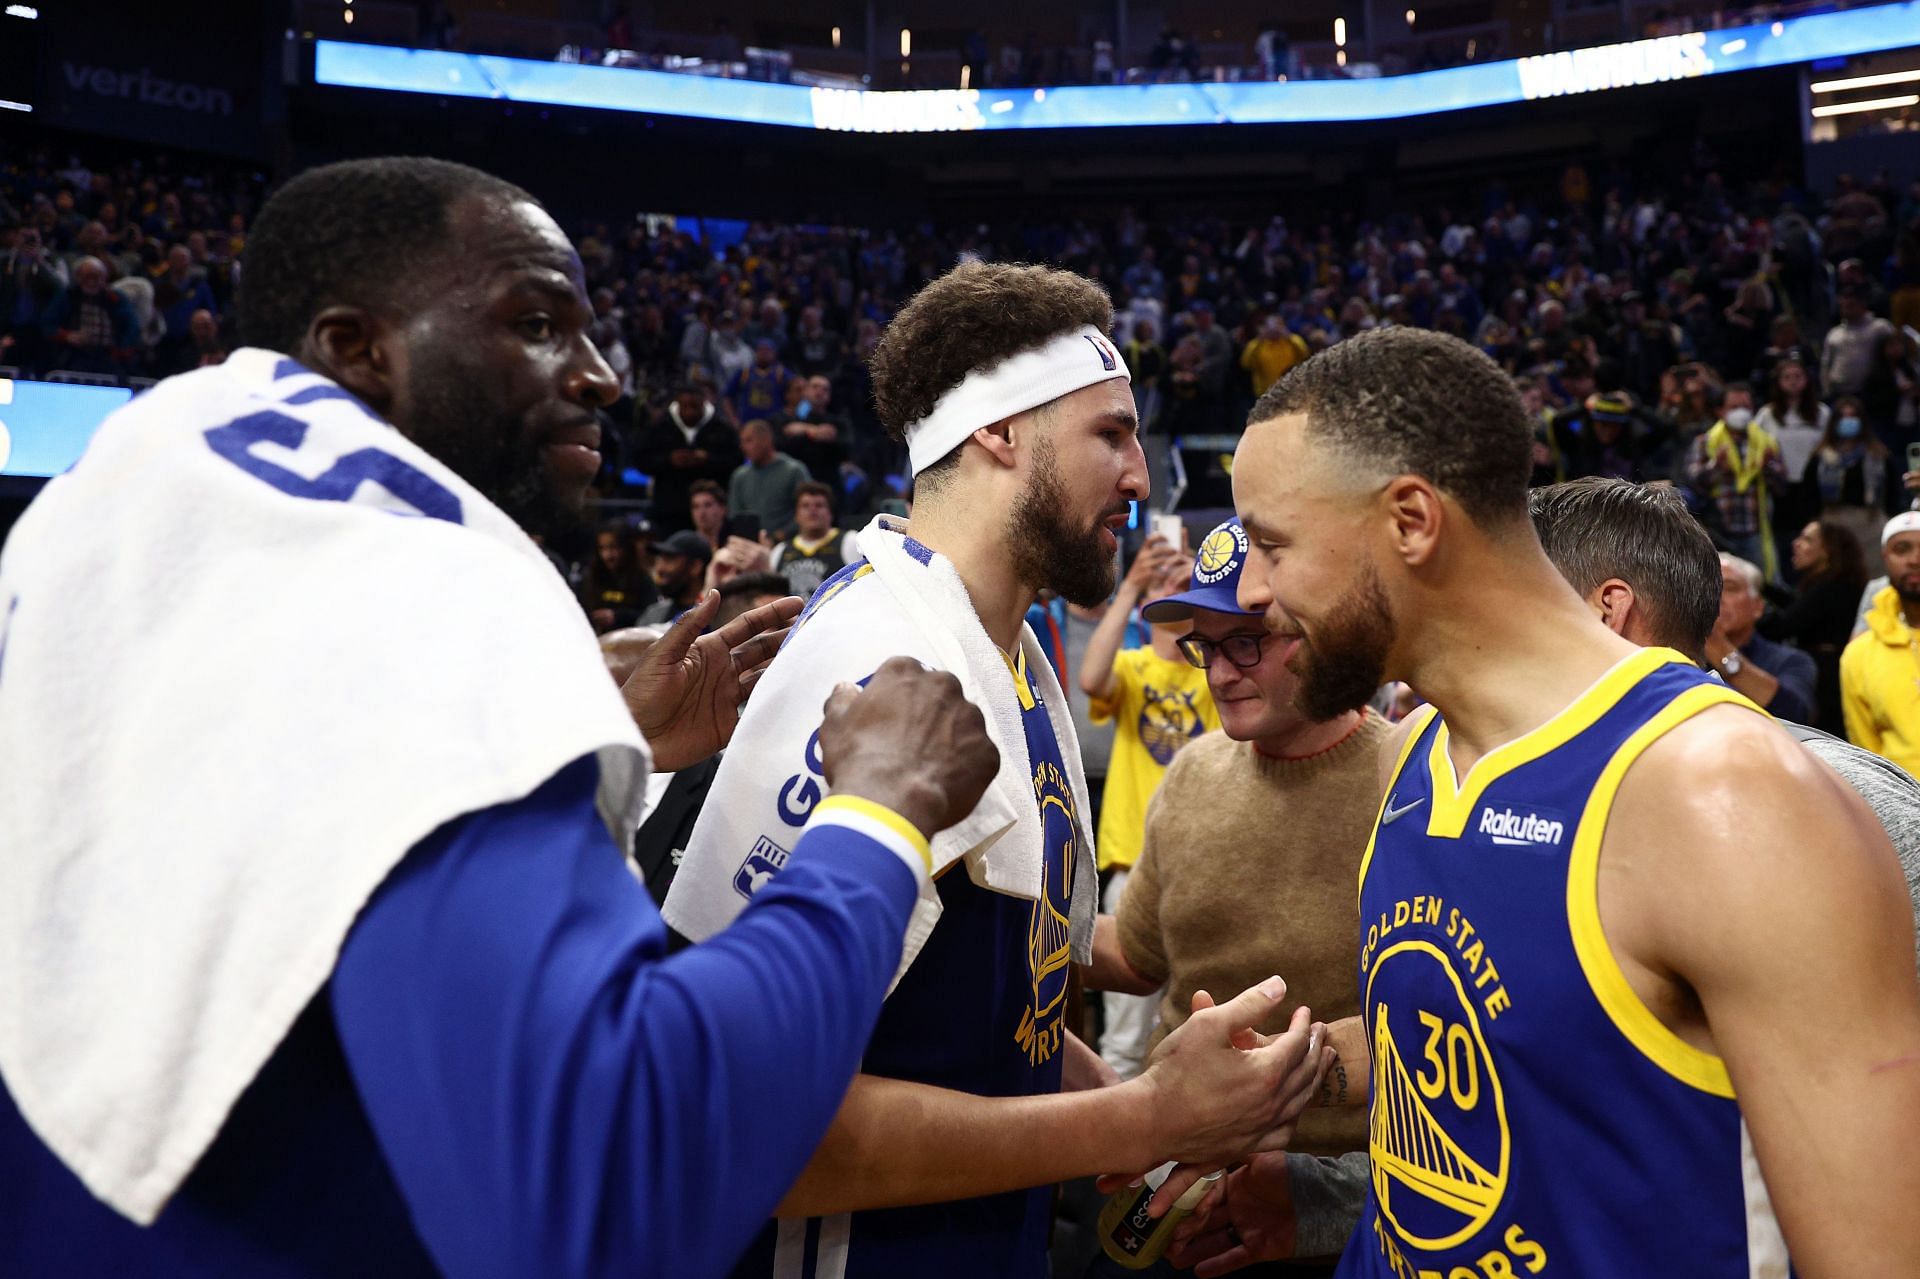 Draymond Green, Klay Thompson and Steph Curry back in the run for a title together